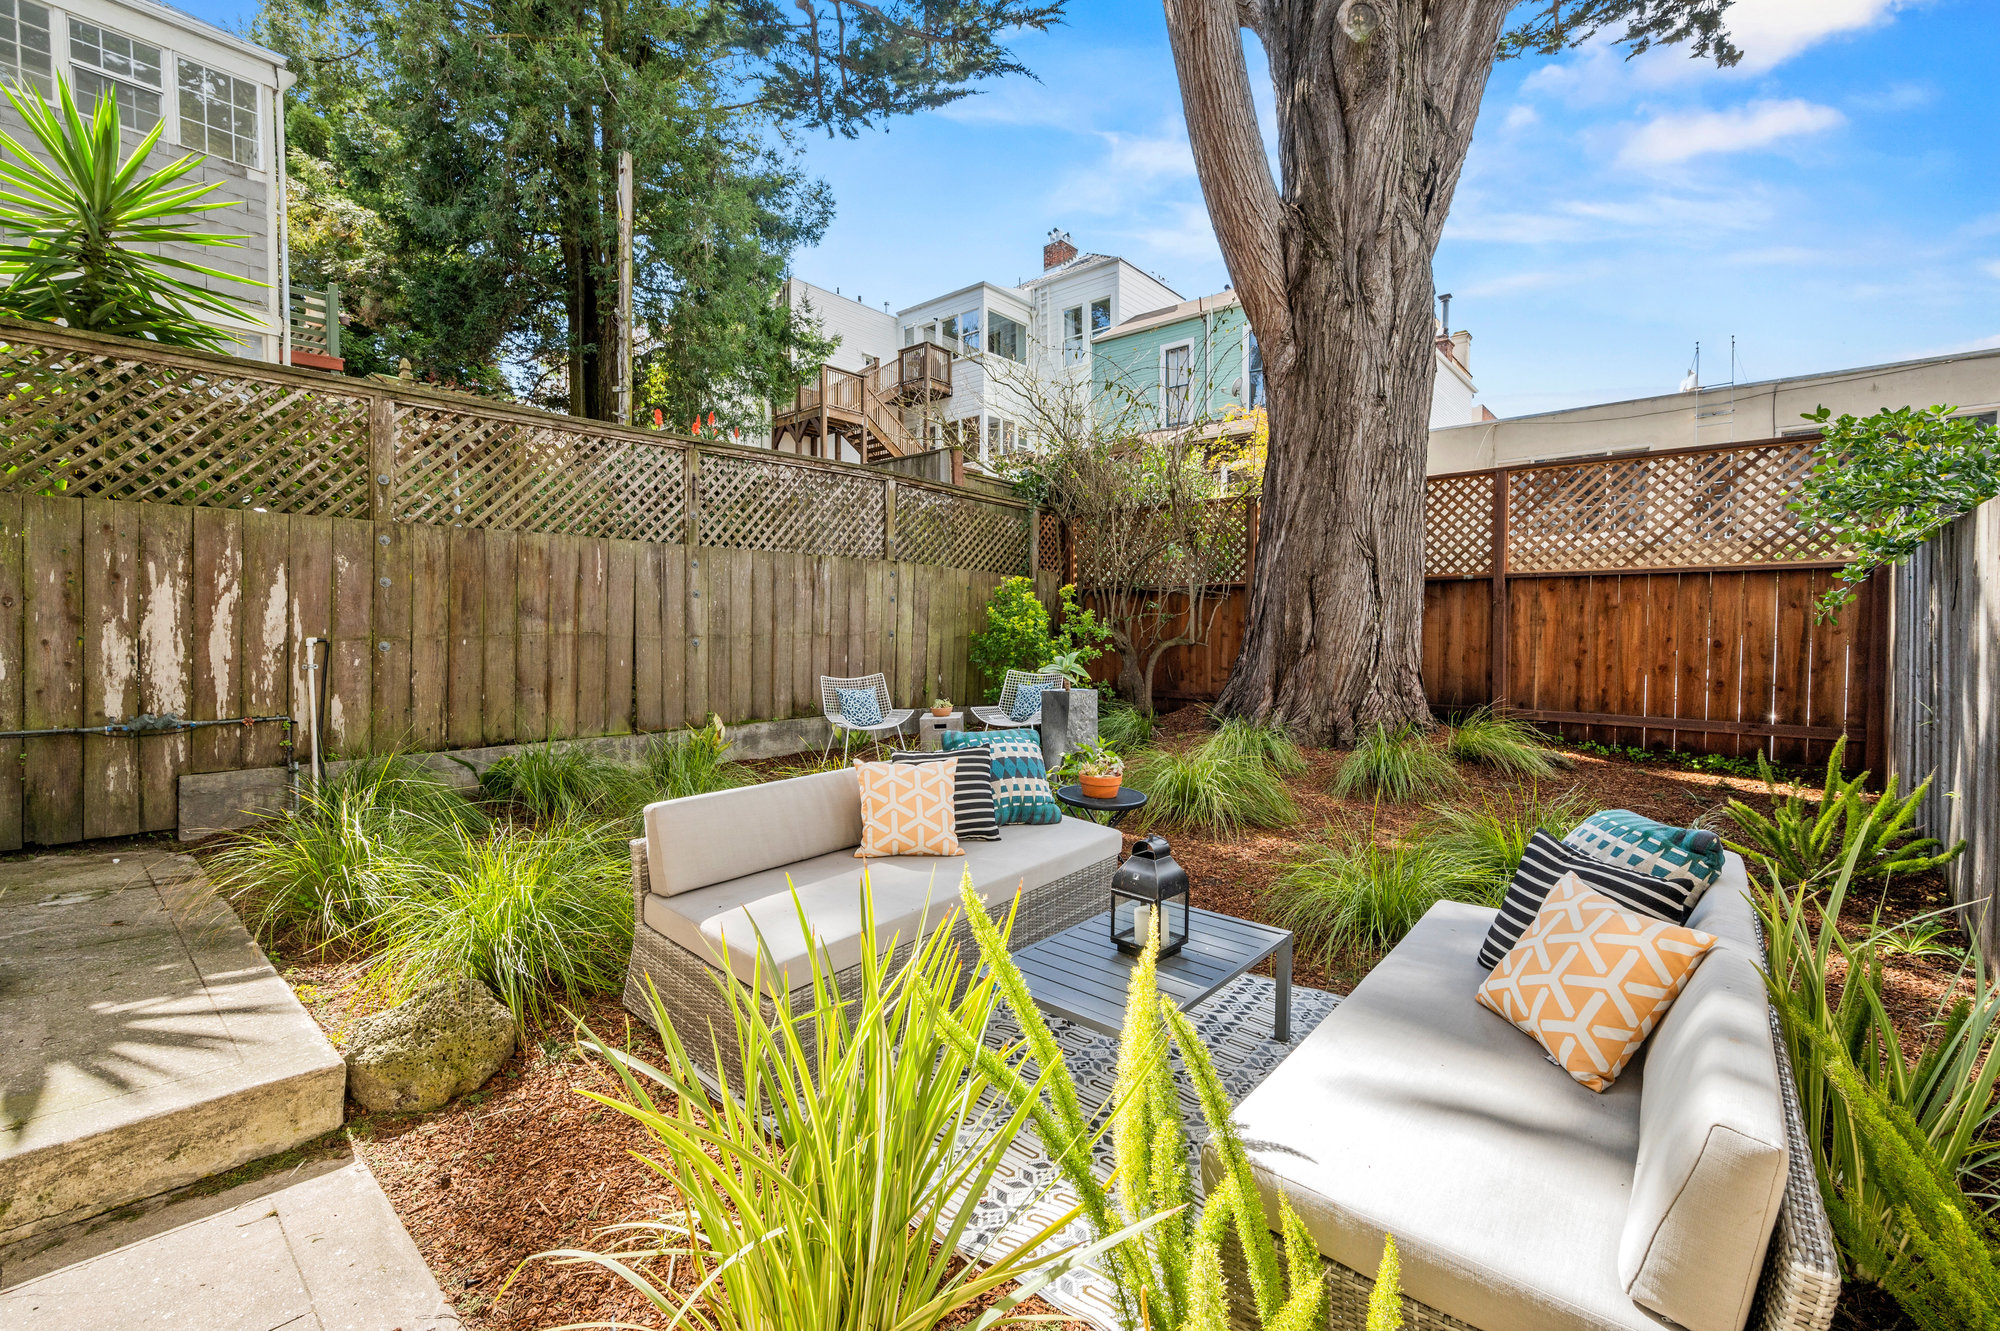 Property Photo: Looking at yard from entry of bonus space. There is a nice sitting area and is well manicured with greenery and wood chips. C